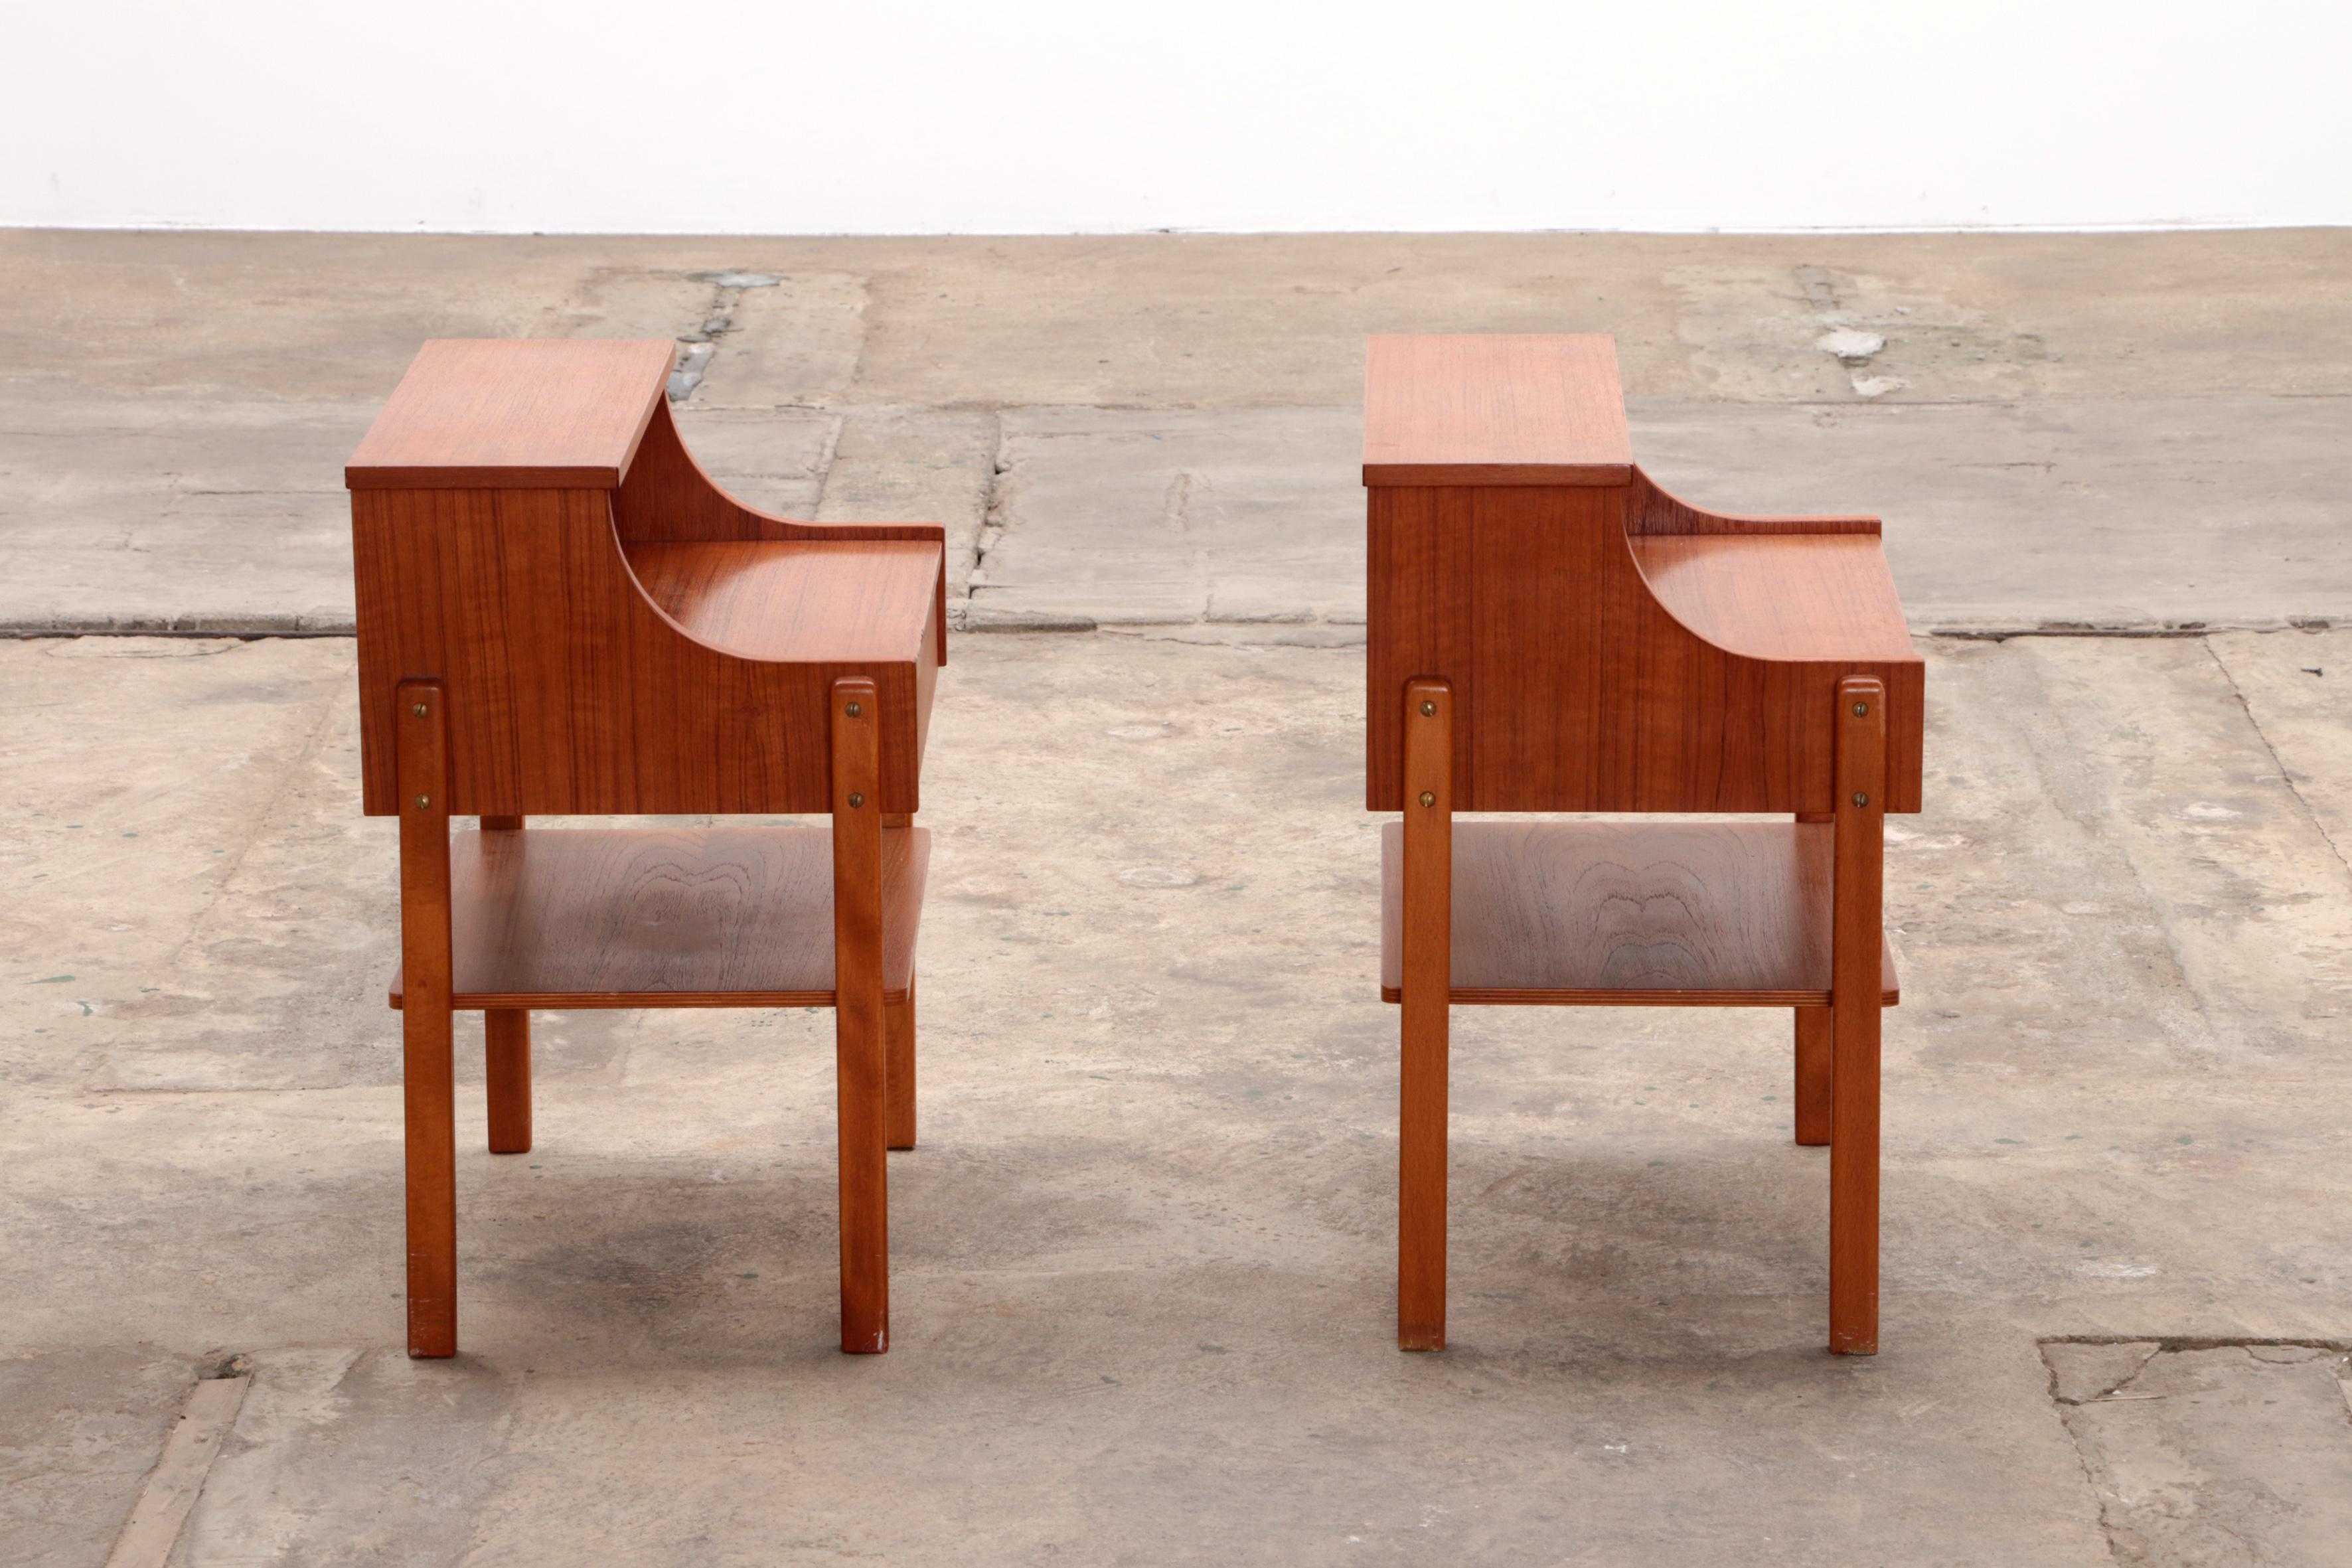 Pair of Scandinavian Bedside Tables in Teak by AB Carlstrom & Co, 1960 For Sale 4